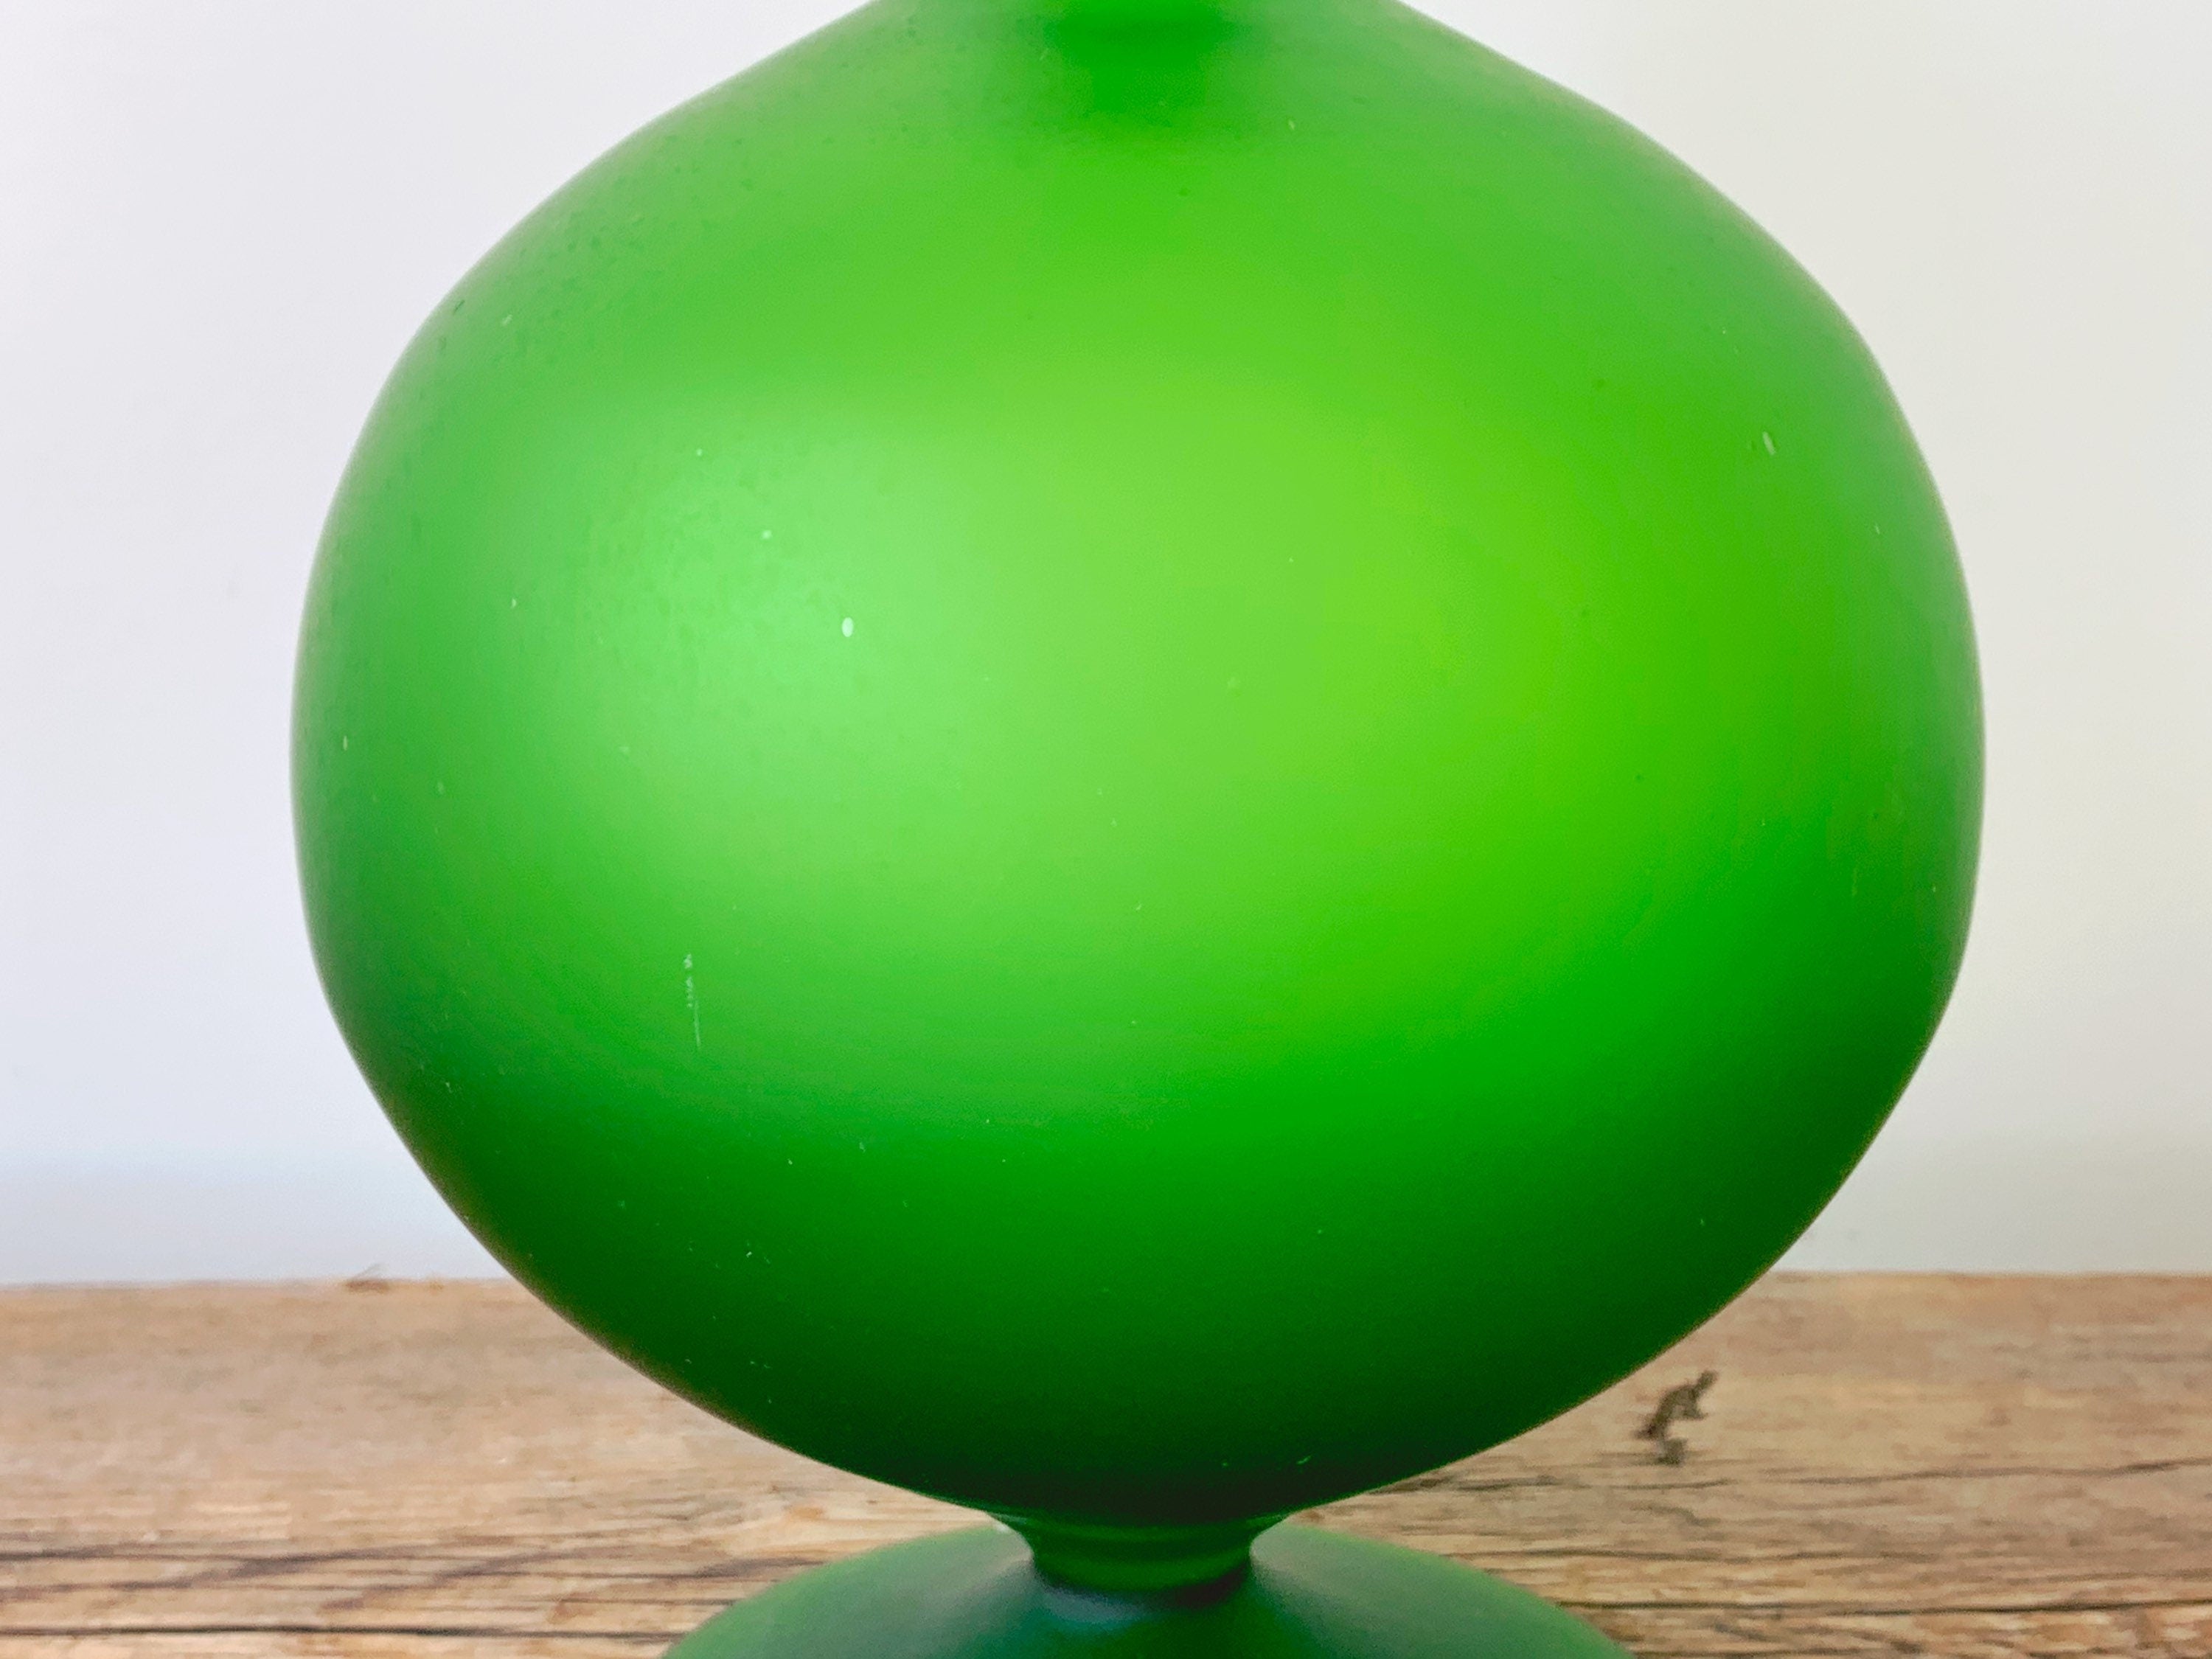 Zodax 14" Hand Blown Round Green Glass Decanter With Round Clear Stopper Made in Portugal | Liquor Decanter Bar Cart Decor